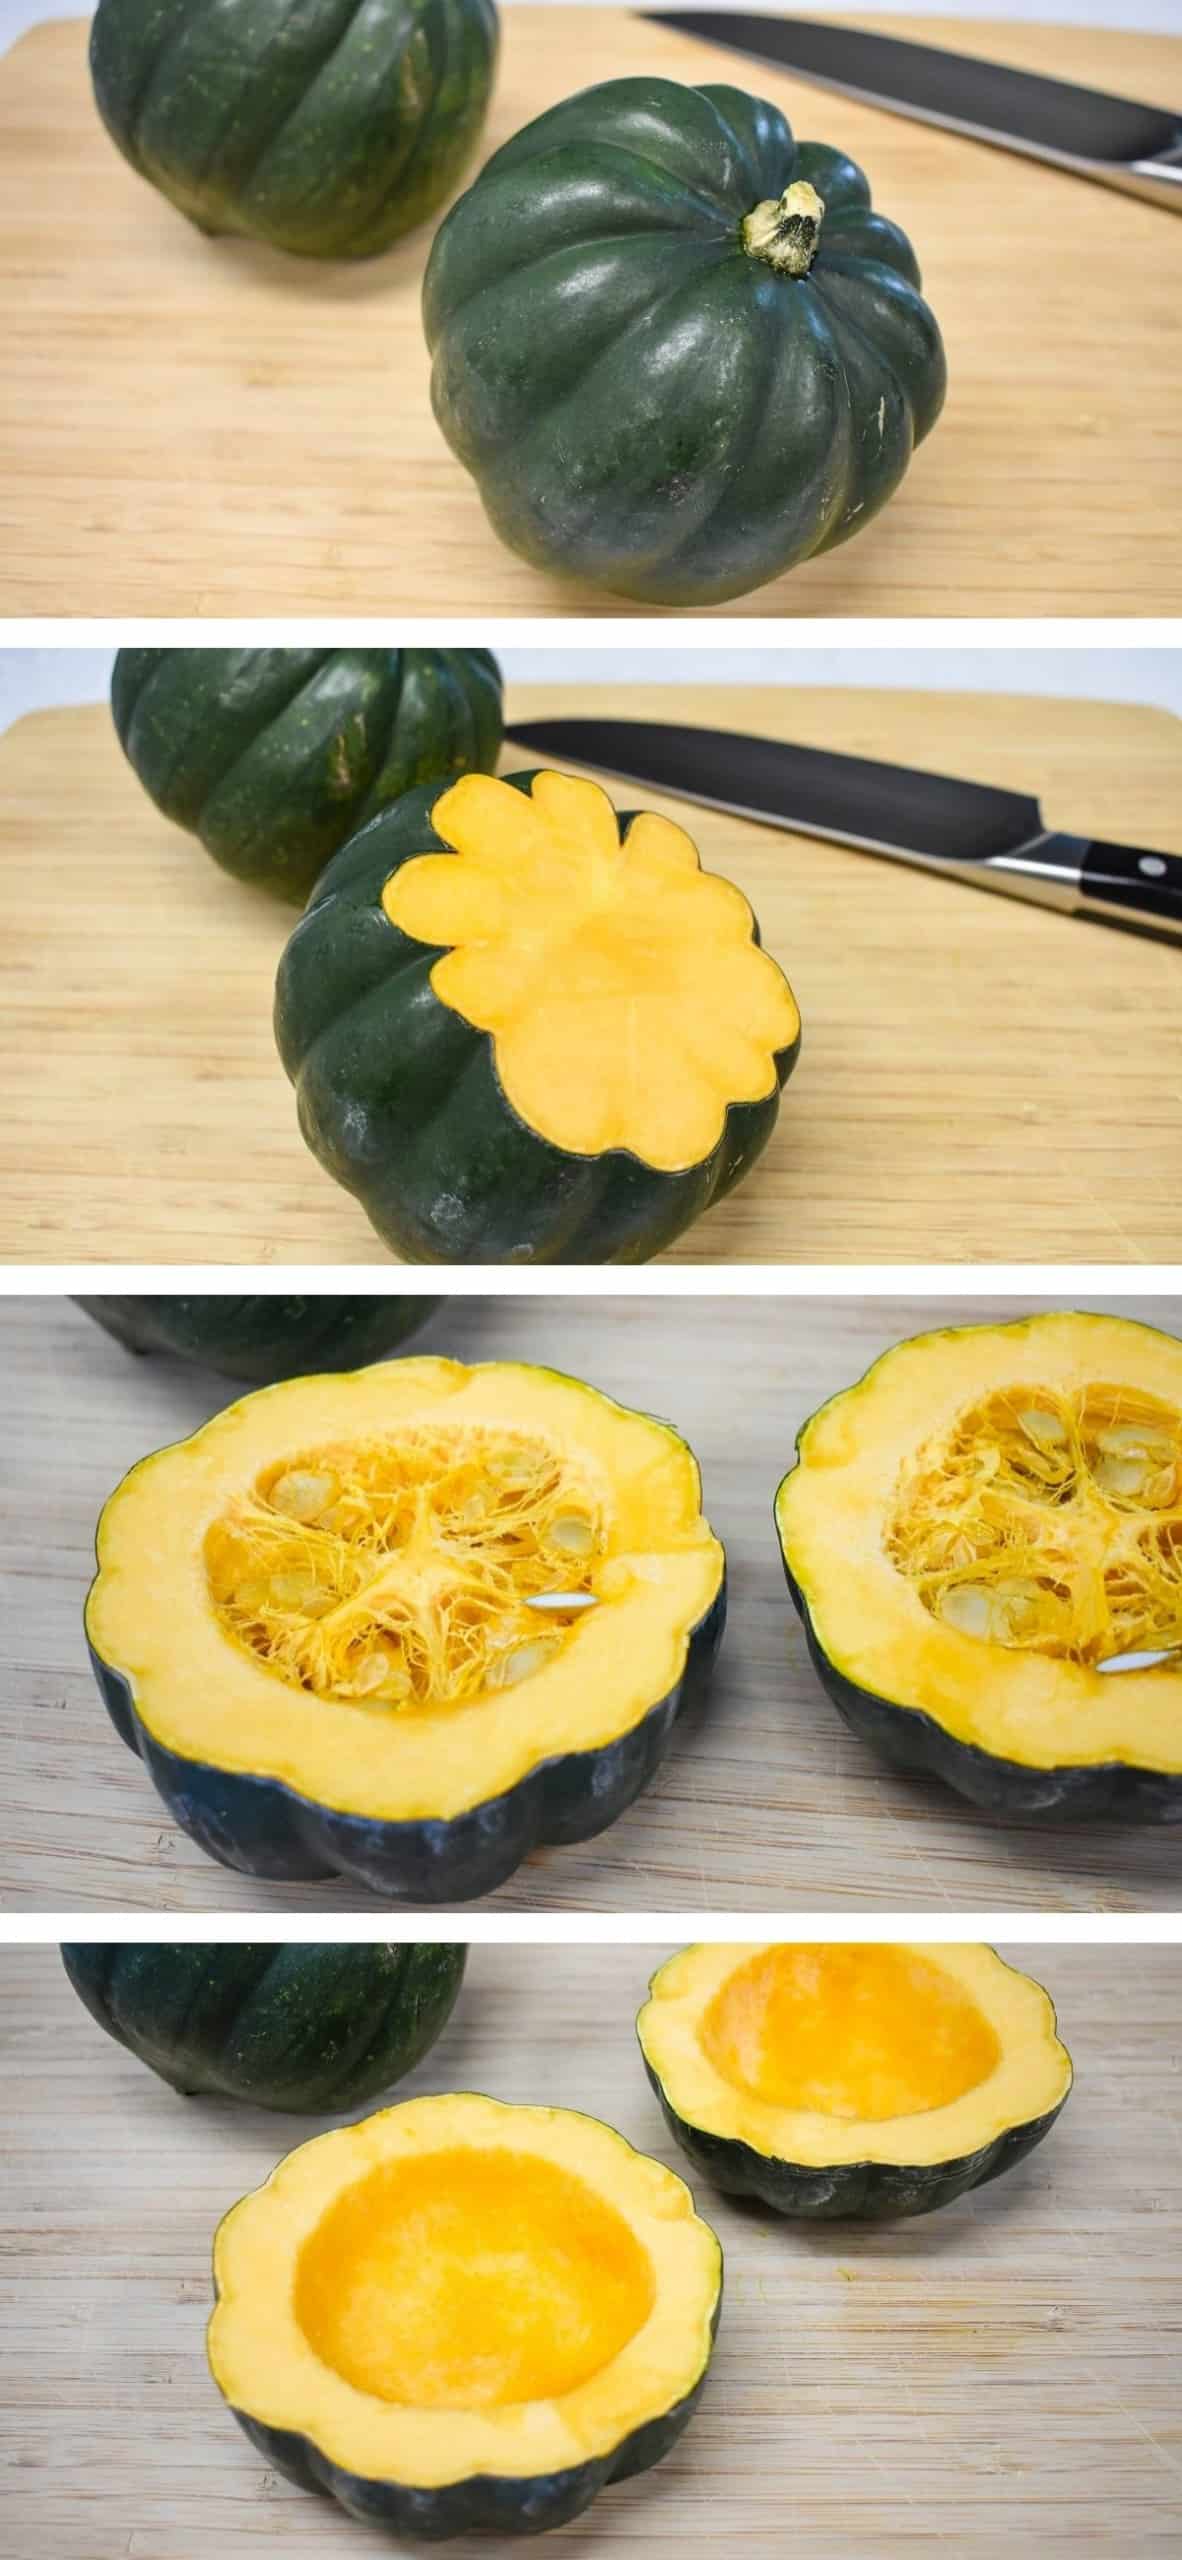 Four images showing how to prepare the squash for the dish.